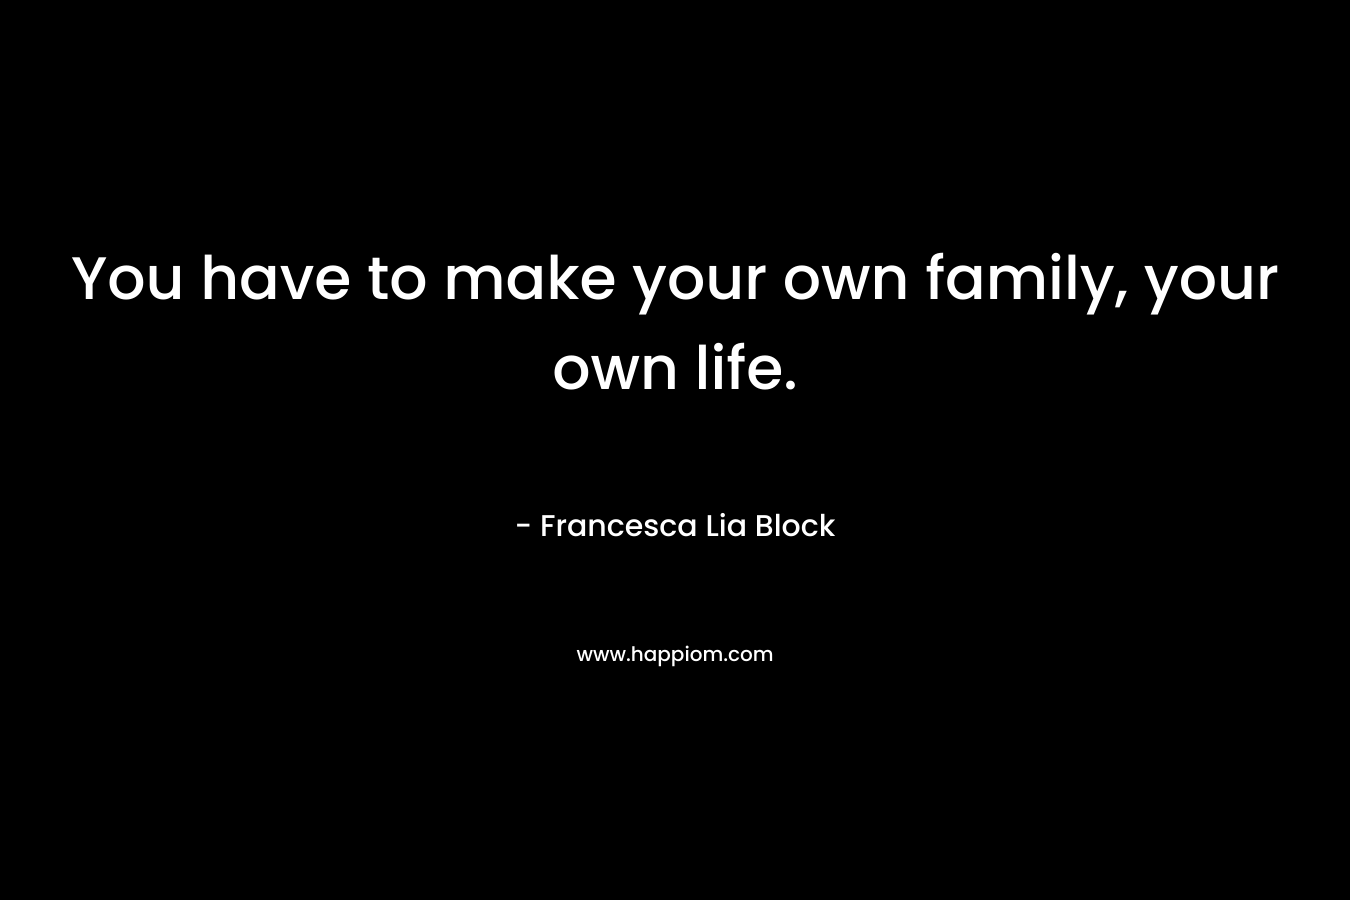 You have to make your own family, your own life.